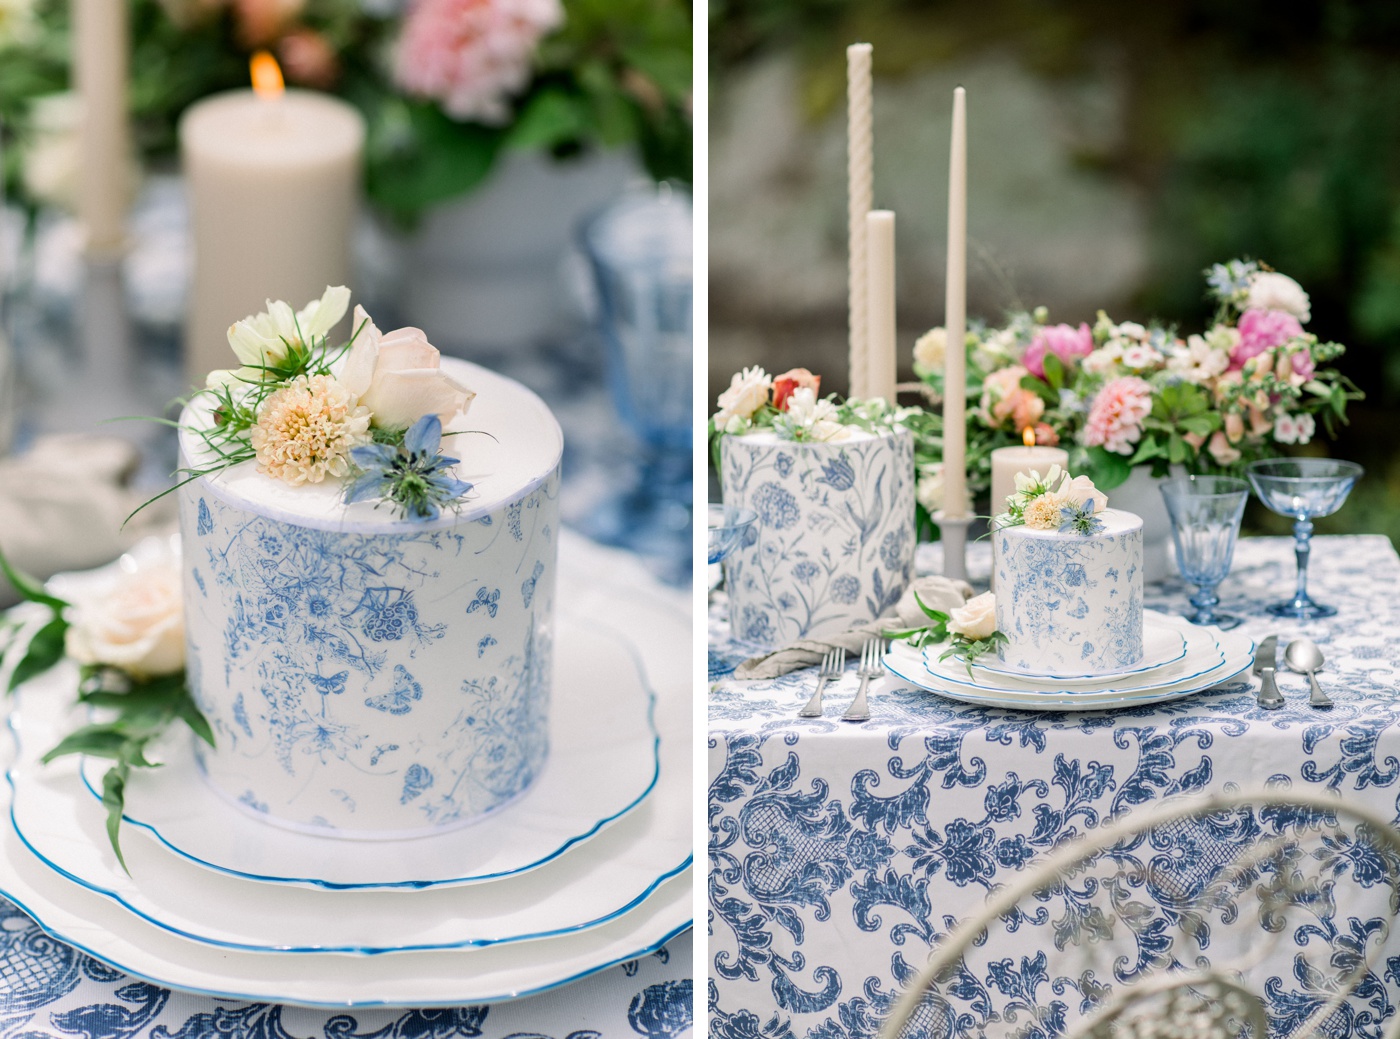 Hand painted toile patten wedding cakes